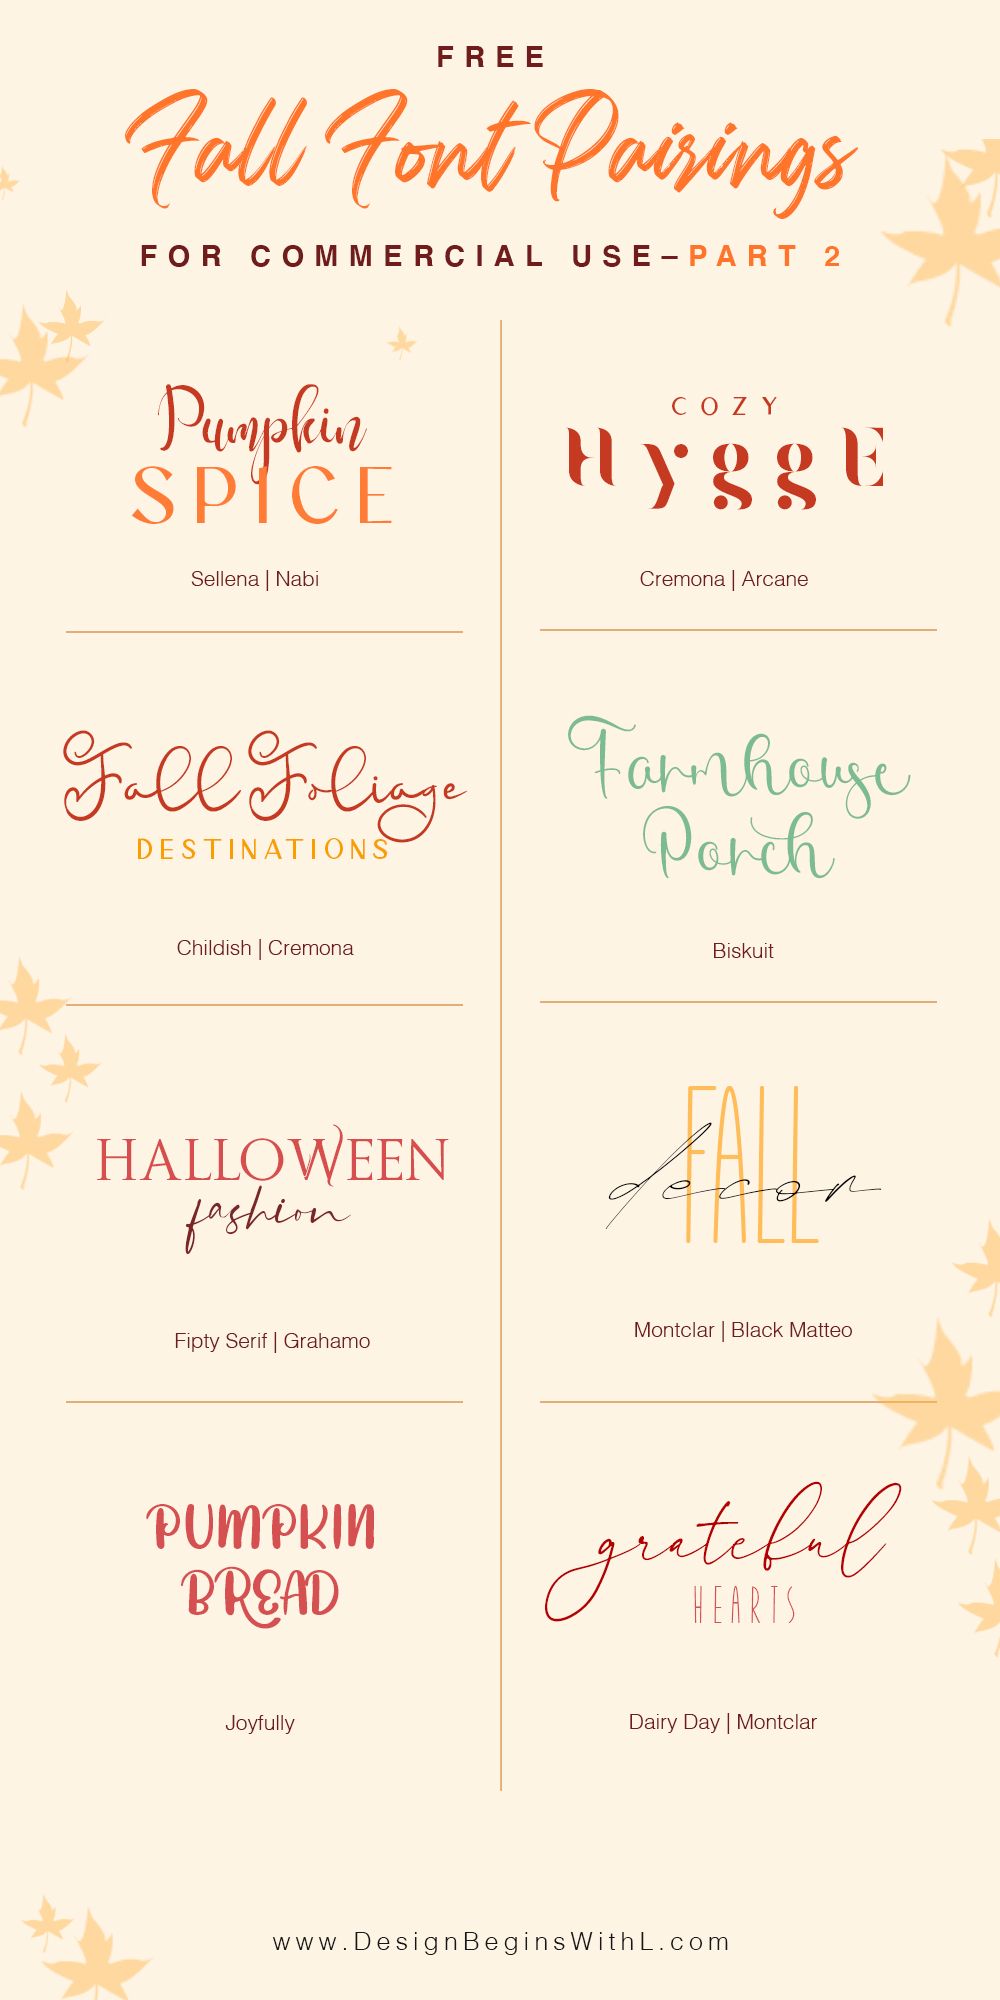 Free Font Pairings for Commercial Use